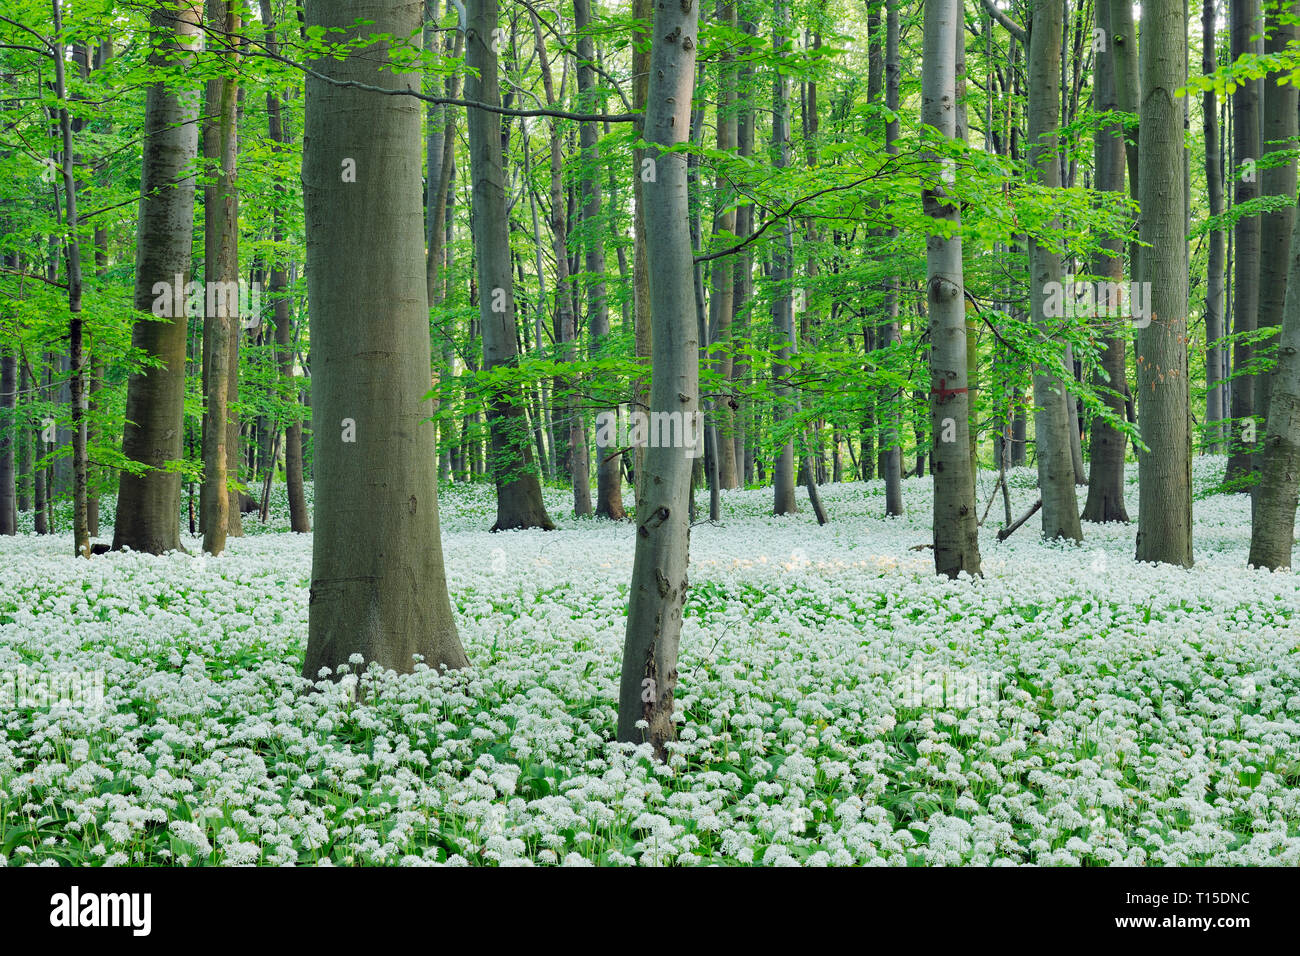 Ramsons (Allium ursinum) in beech (fagus sylvatica) forest, spring with lush green foliage. Hainich National Park, Thuringia, Germany. Stock Photo